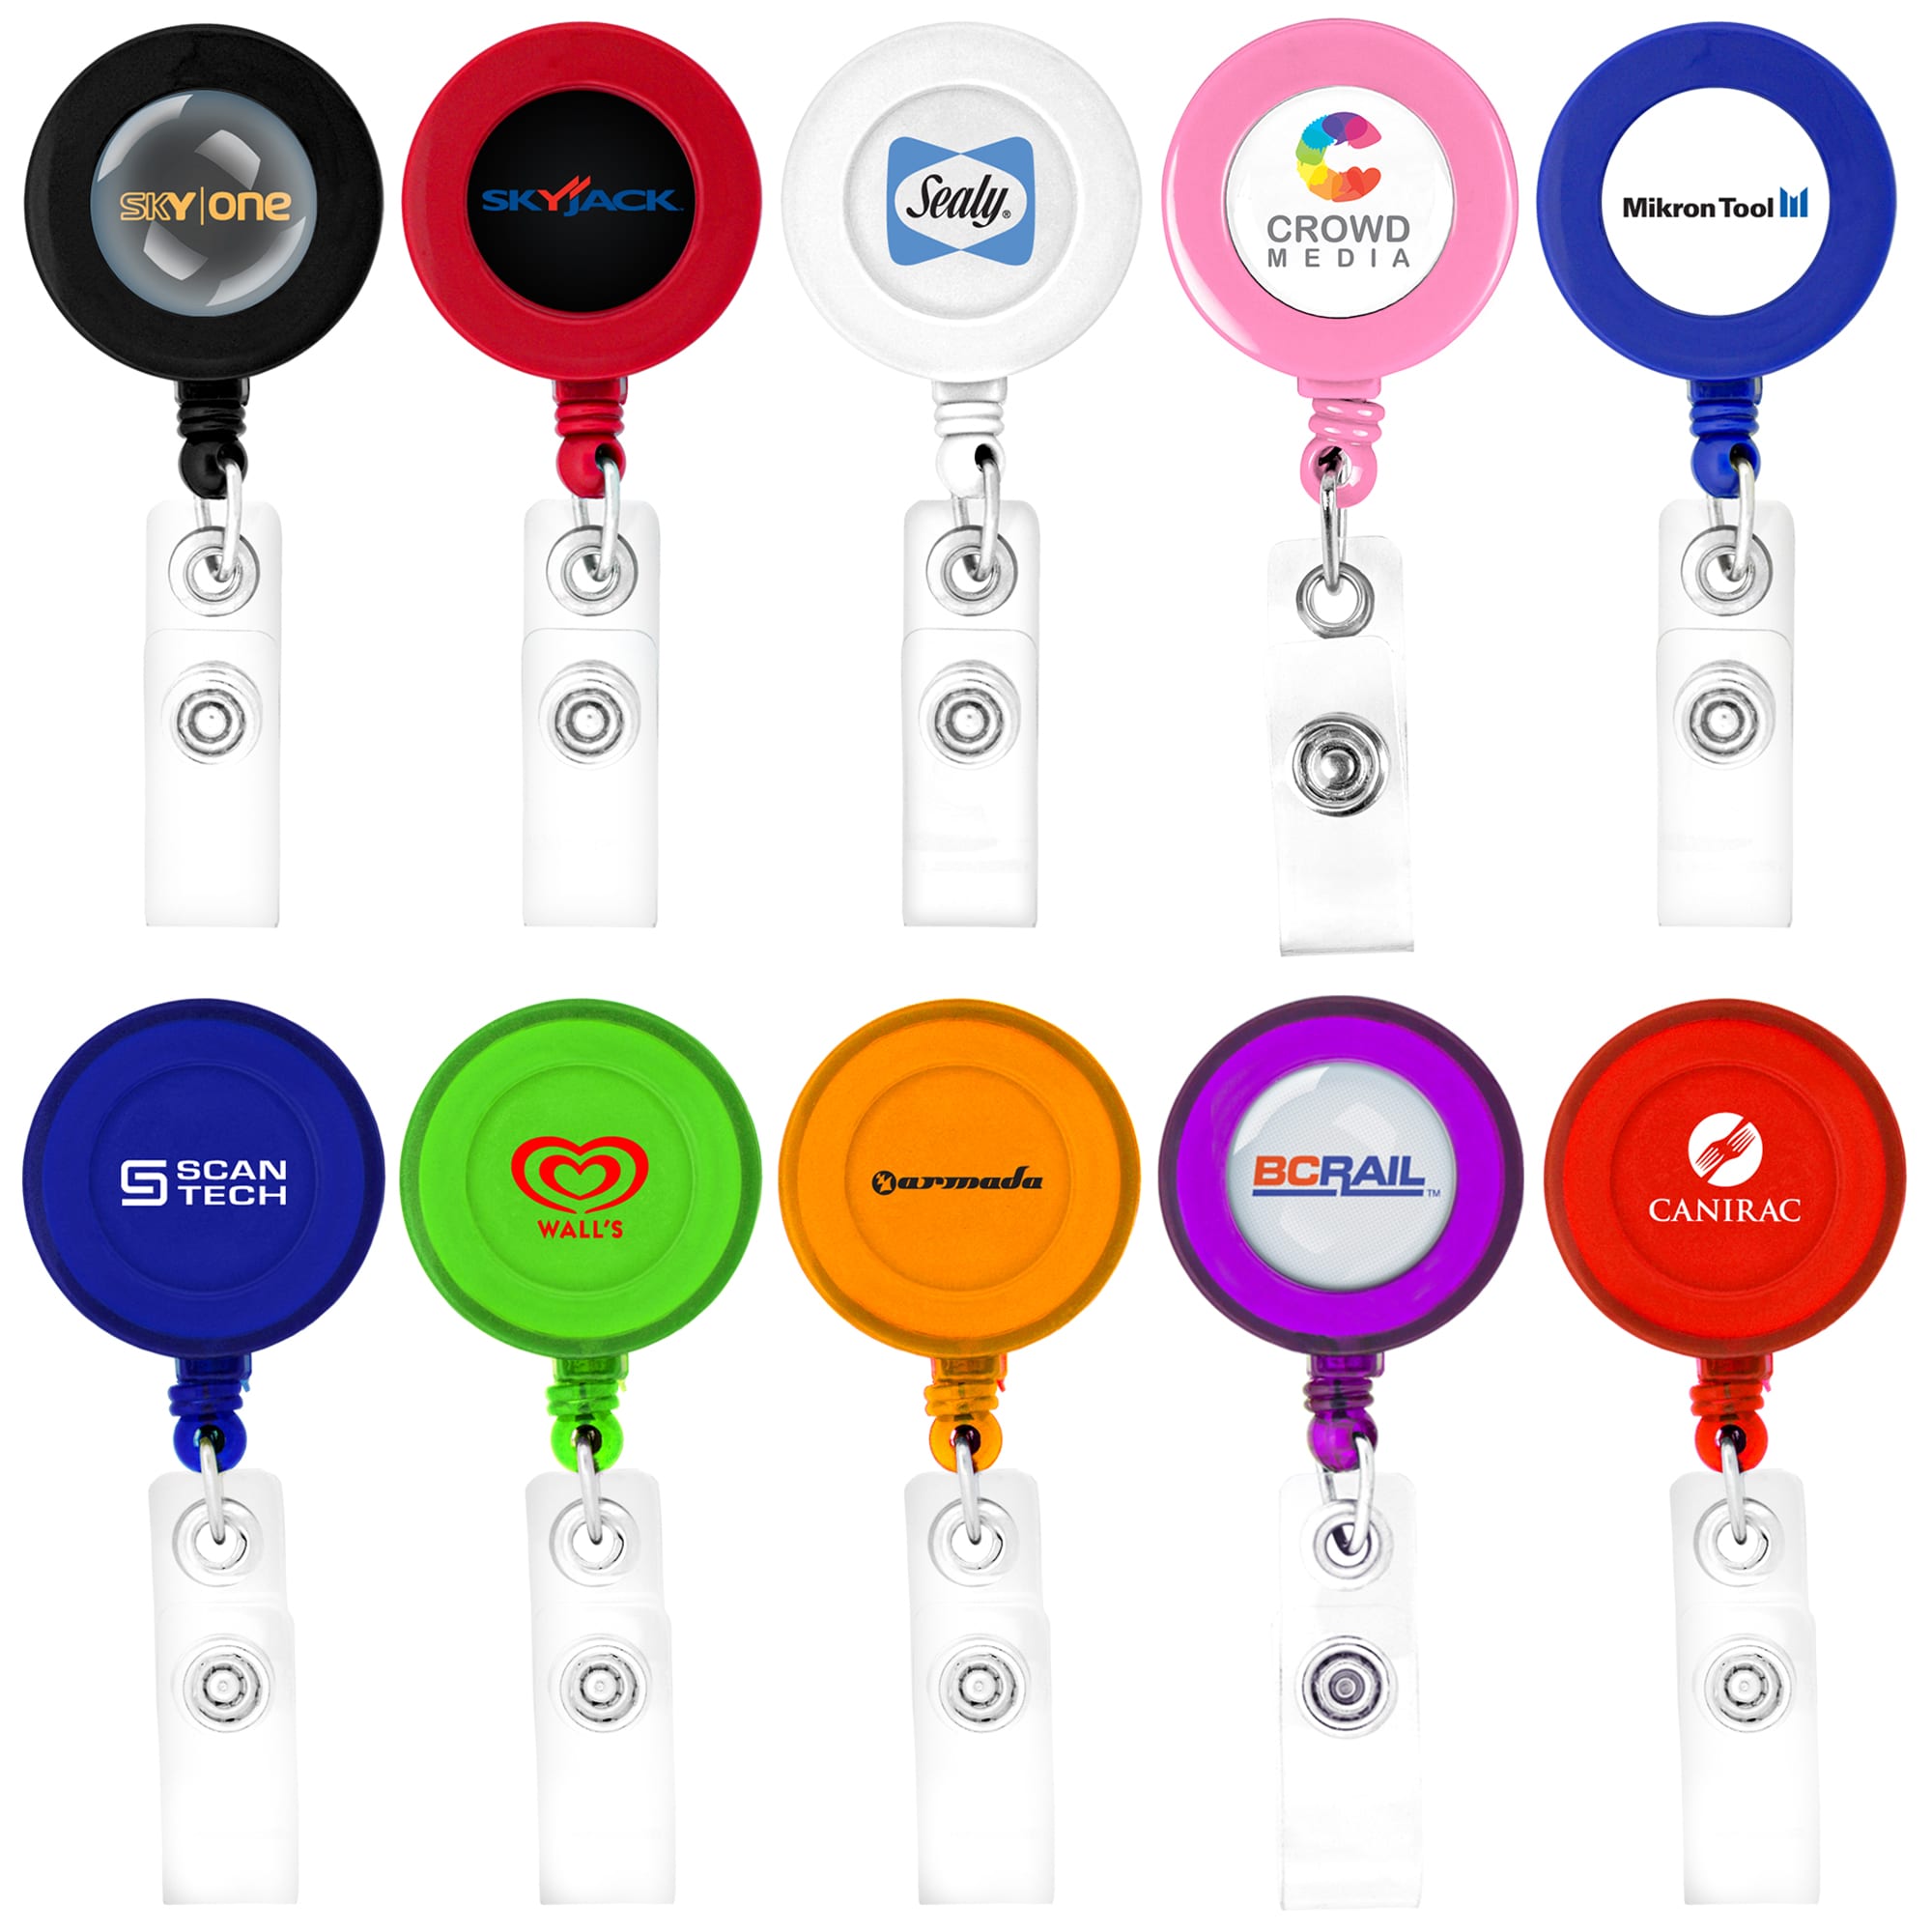 Round Shaped Retractable Badge Holder - Display Pros